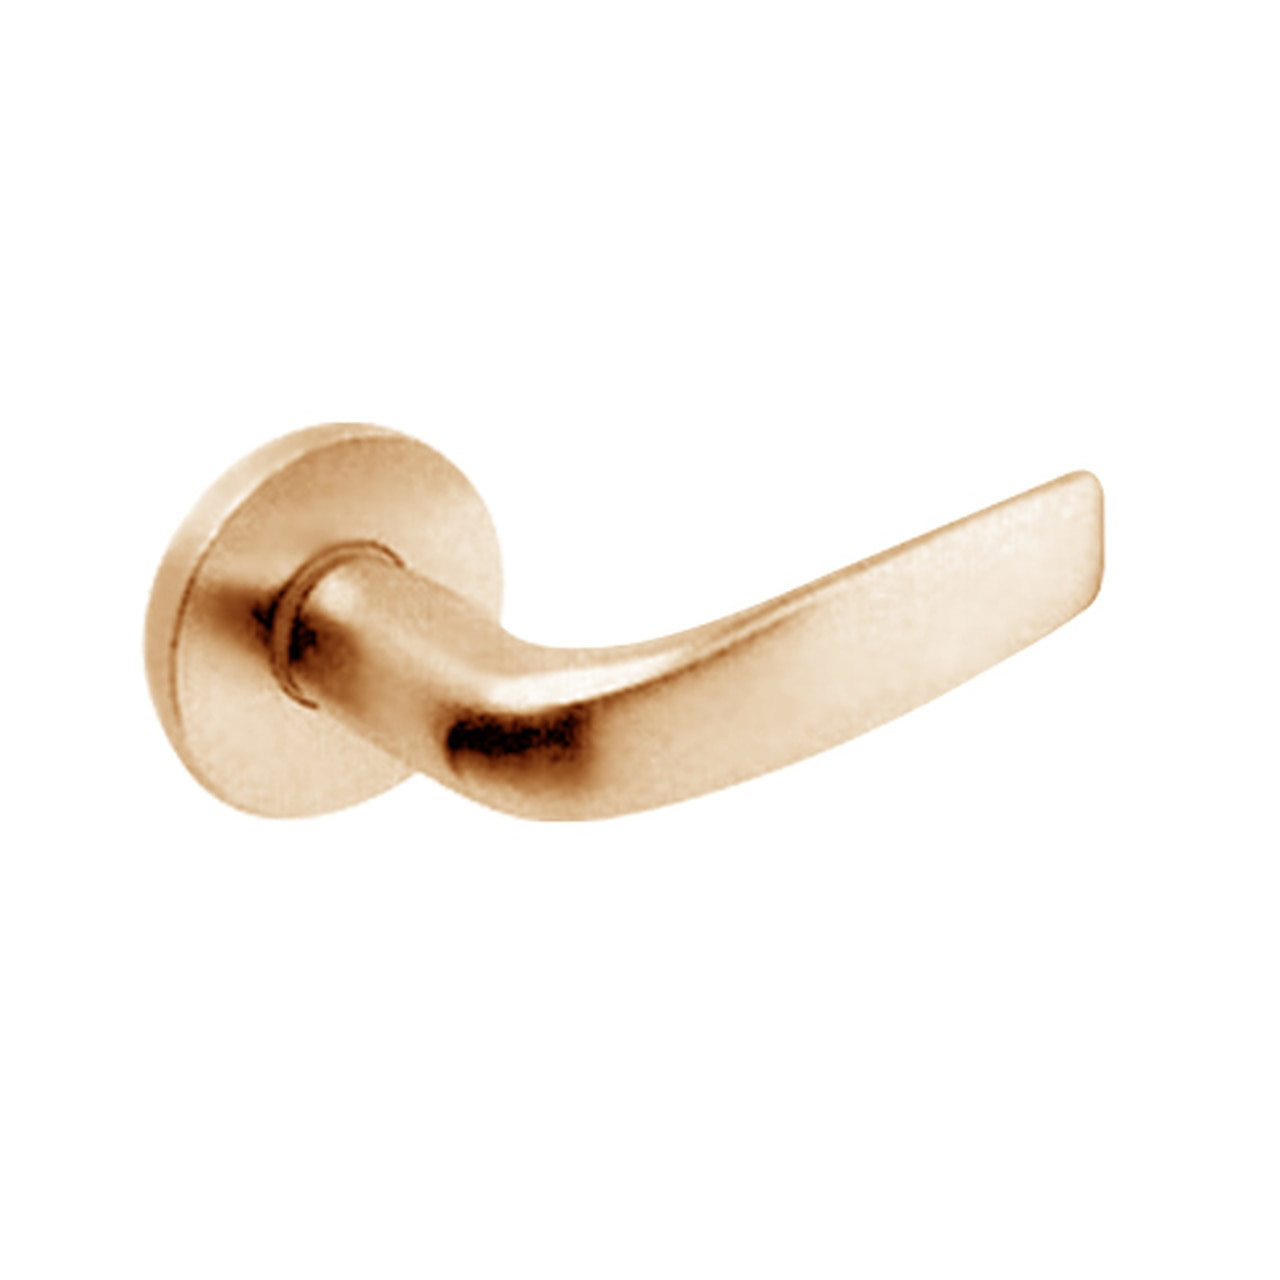 ML2054-CSA-612-M31 Corbin Russwin ML2000 Series Mortise Entrance Trim Pack with Citation Lever in Satin Bronze